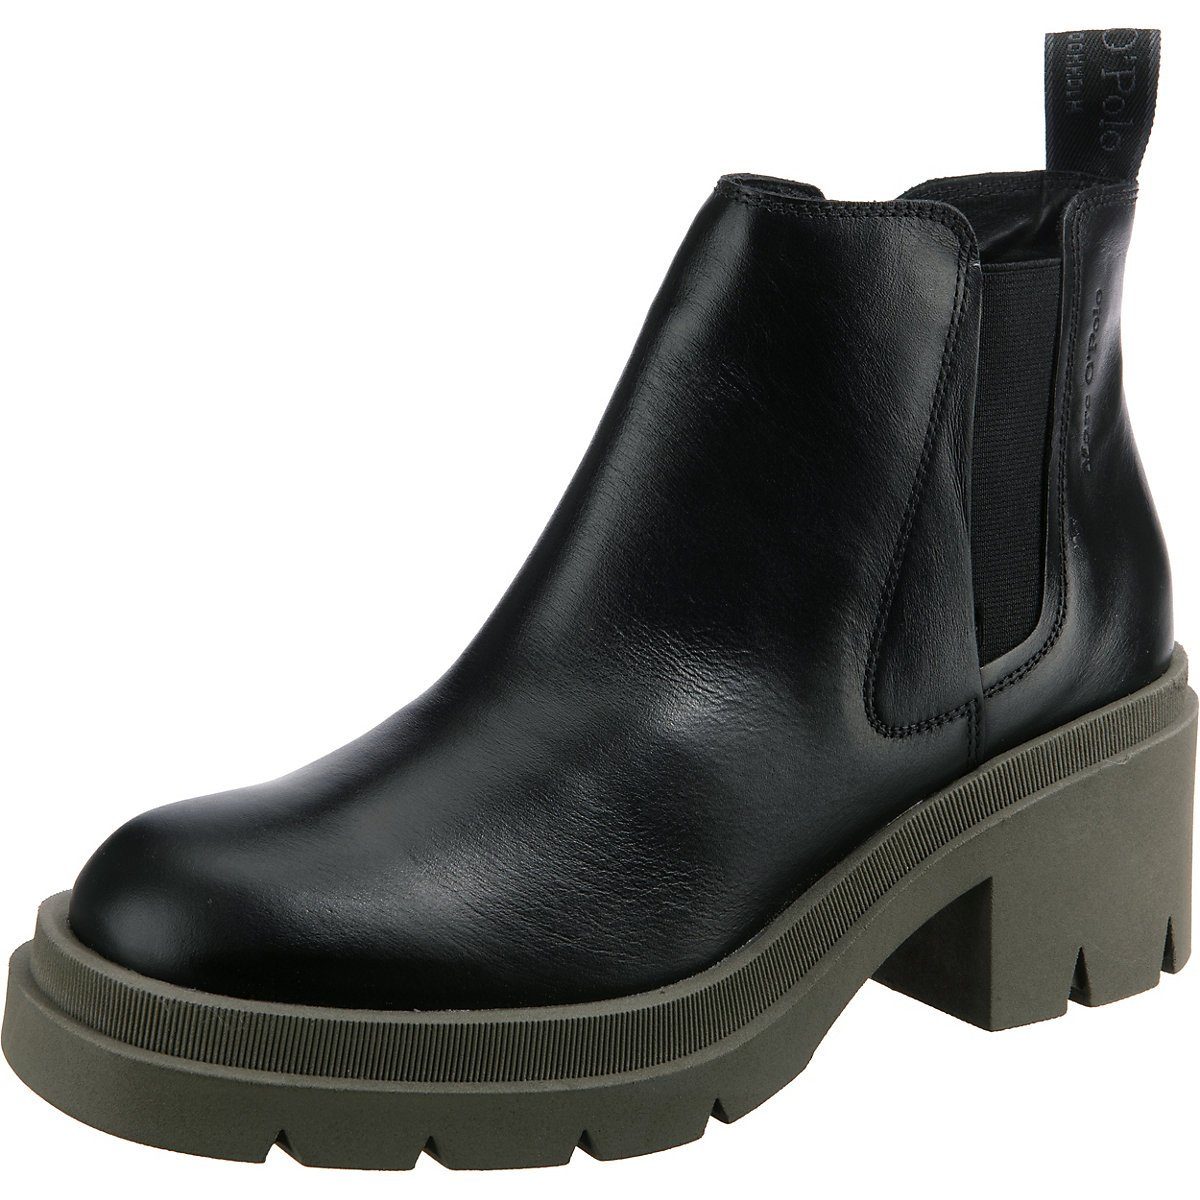 Marc O'Polo Tyra 3a Chelsea Boots Chelseaboots